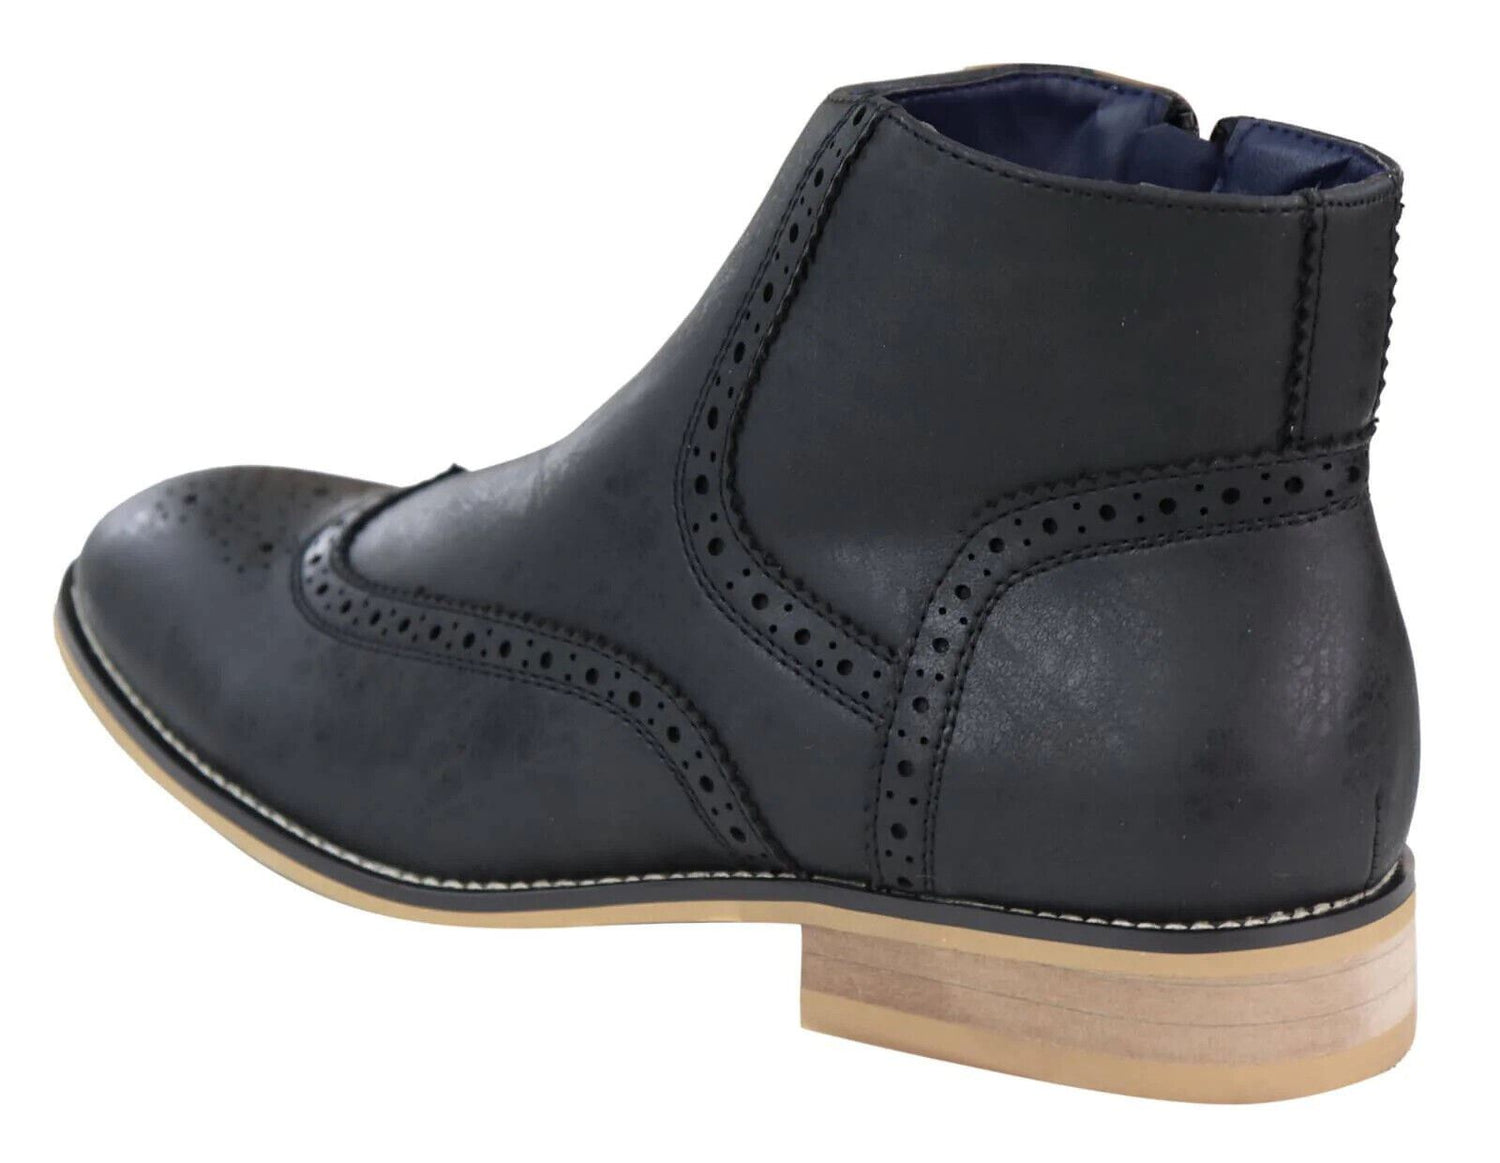 Mens Black Leather Brogue Zip Up Chelsea Boots - Upperclass Fashions 